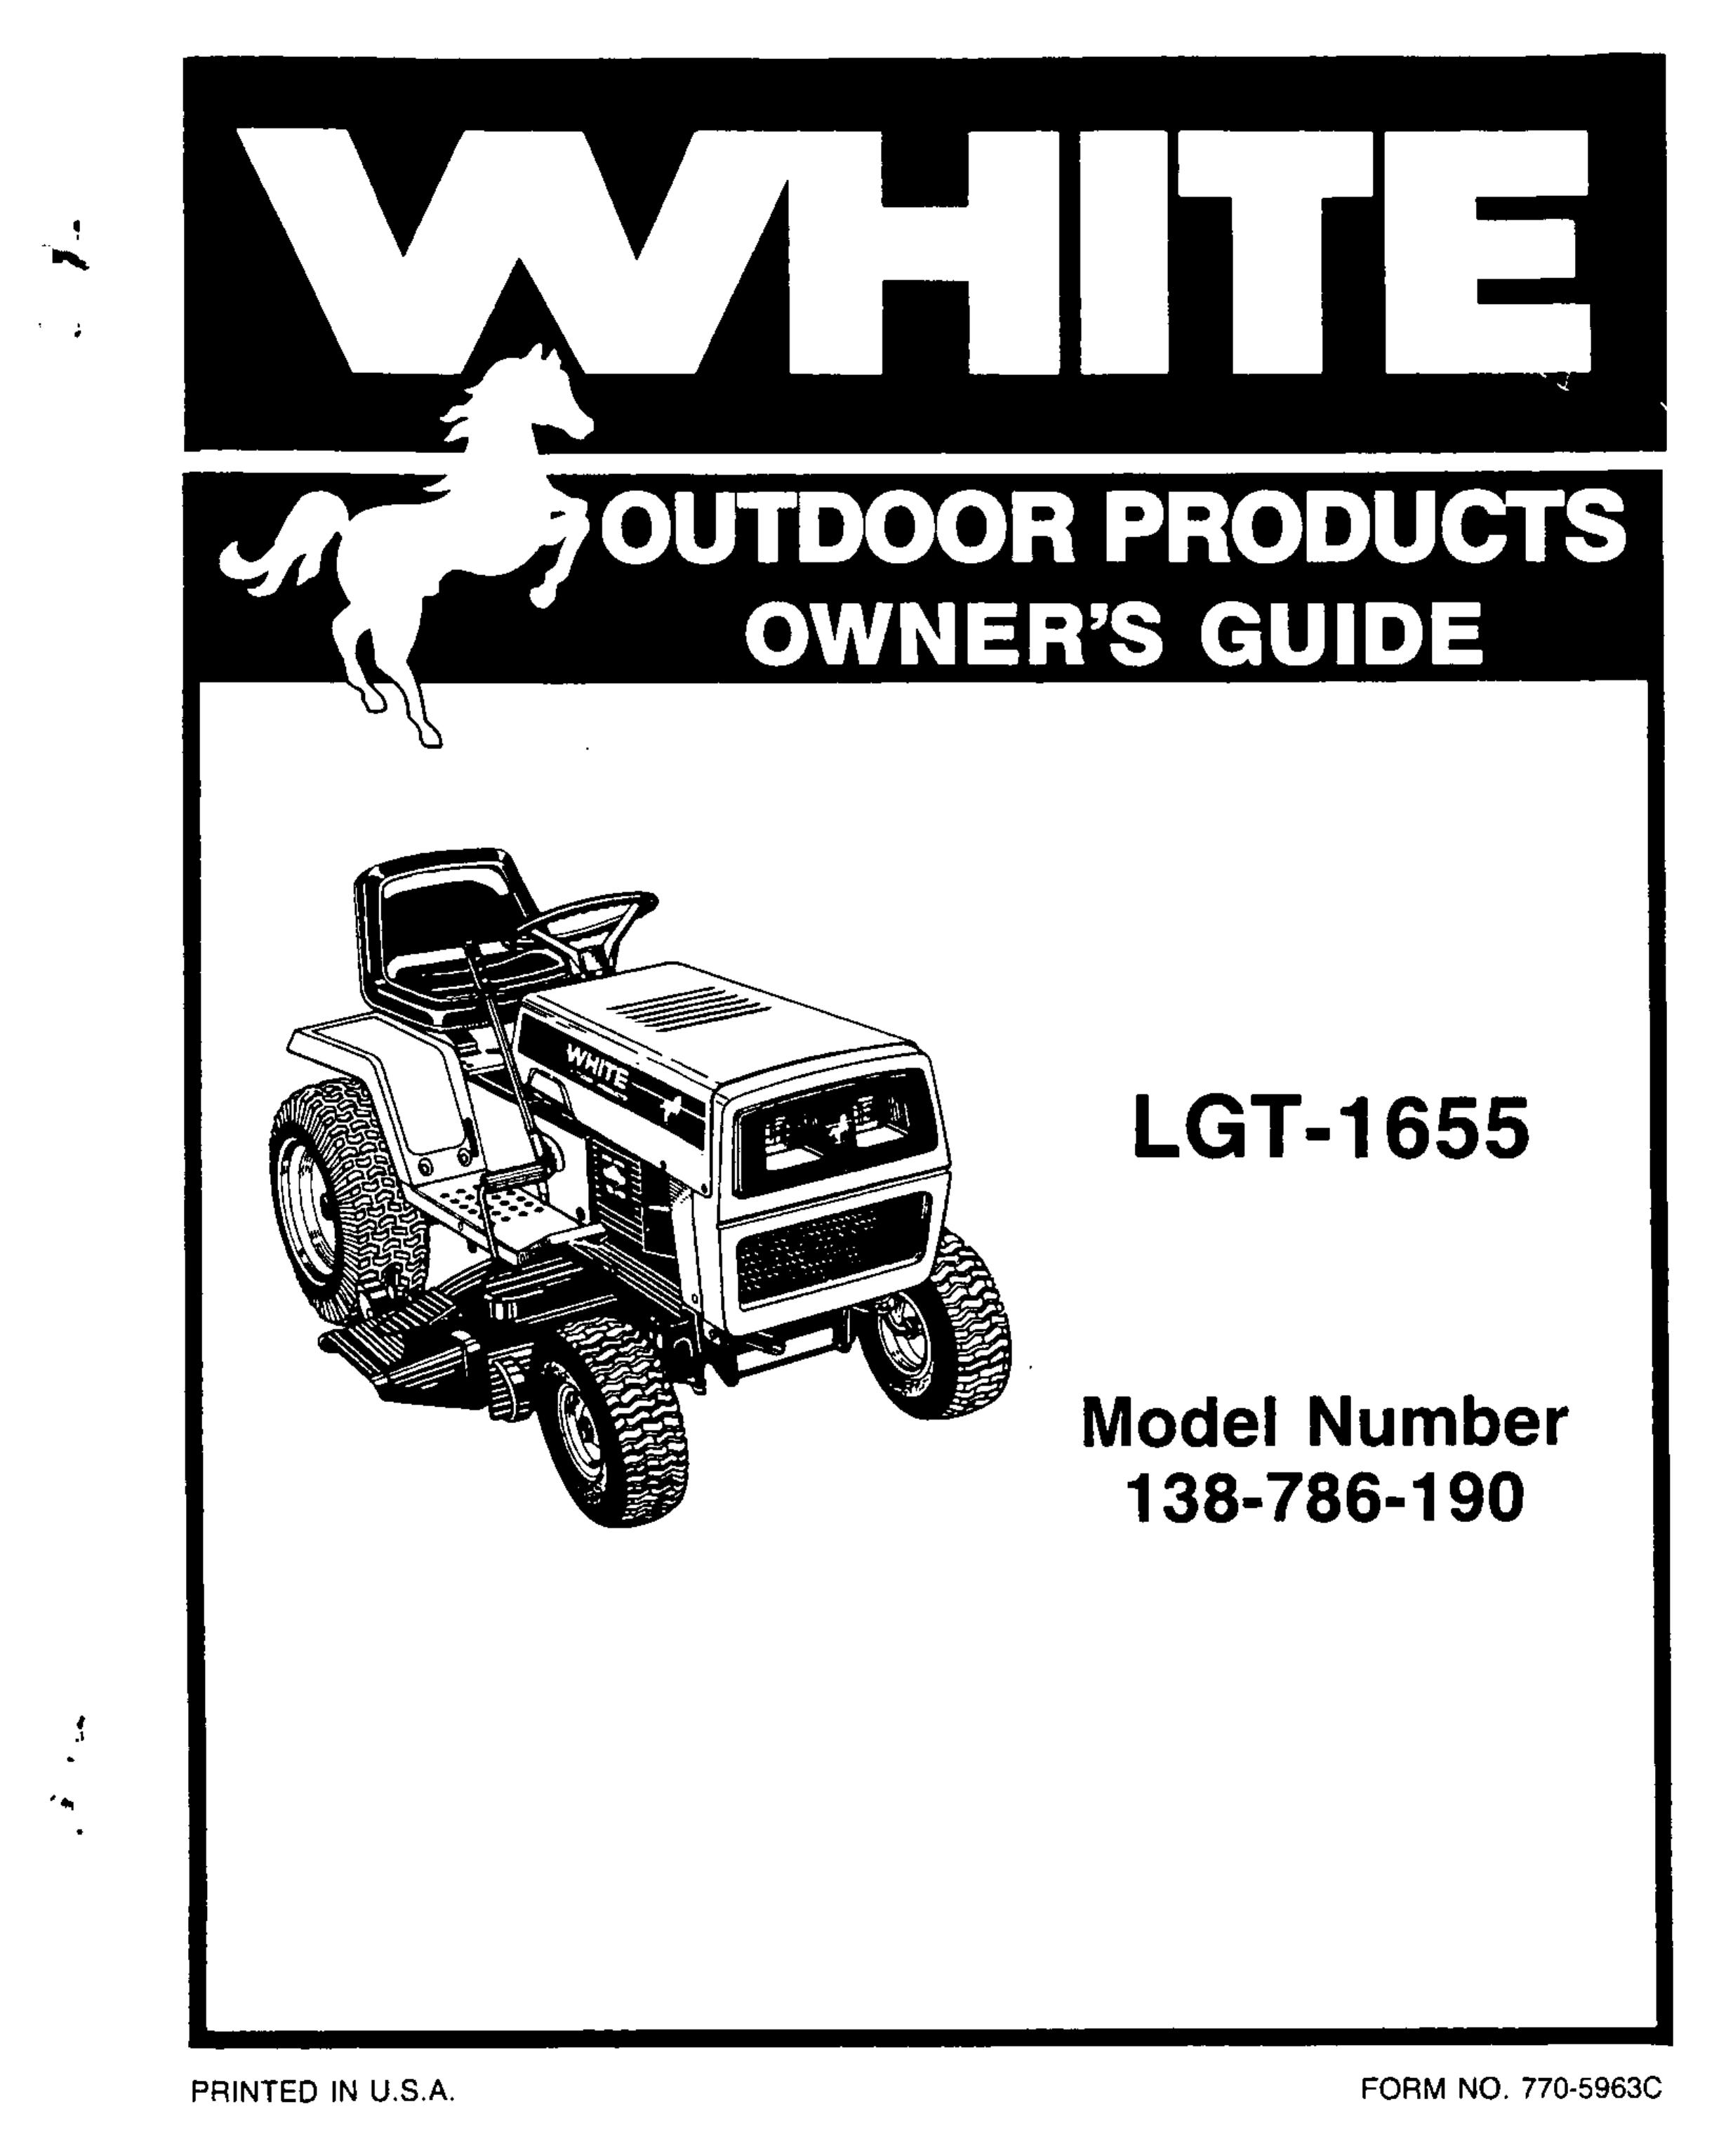 White Outdoor 138-786-190 Lawn Mower User Manual